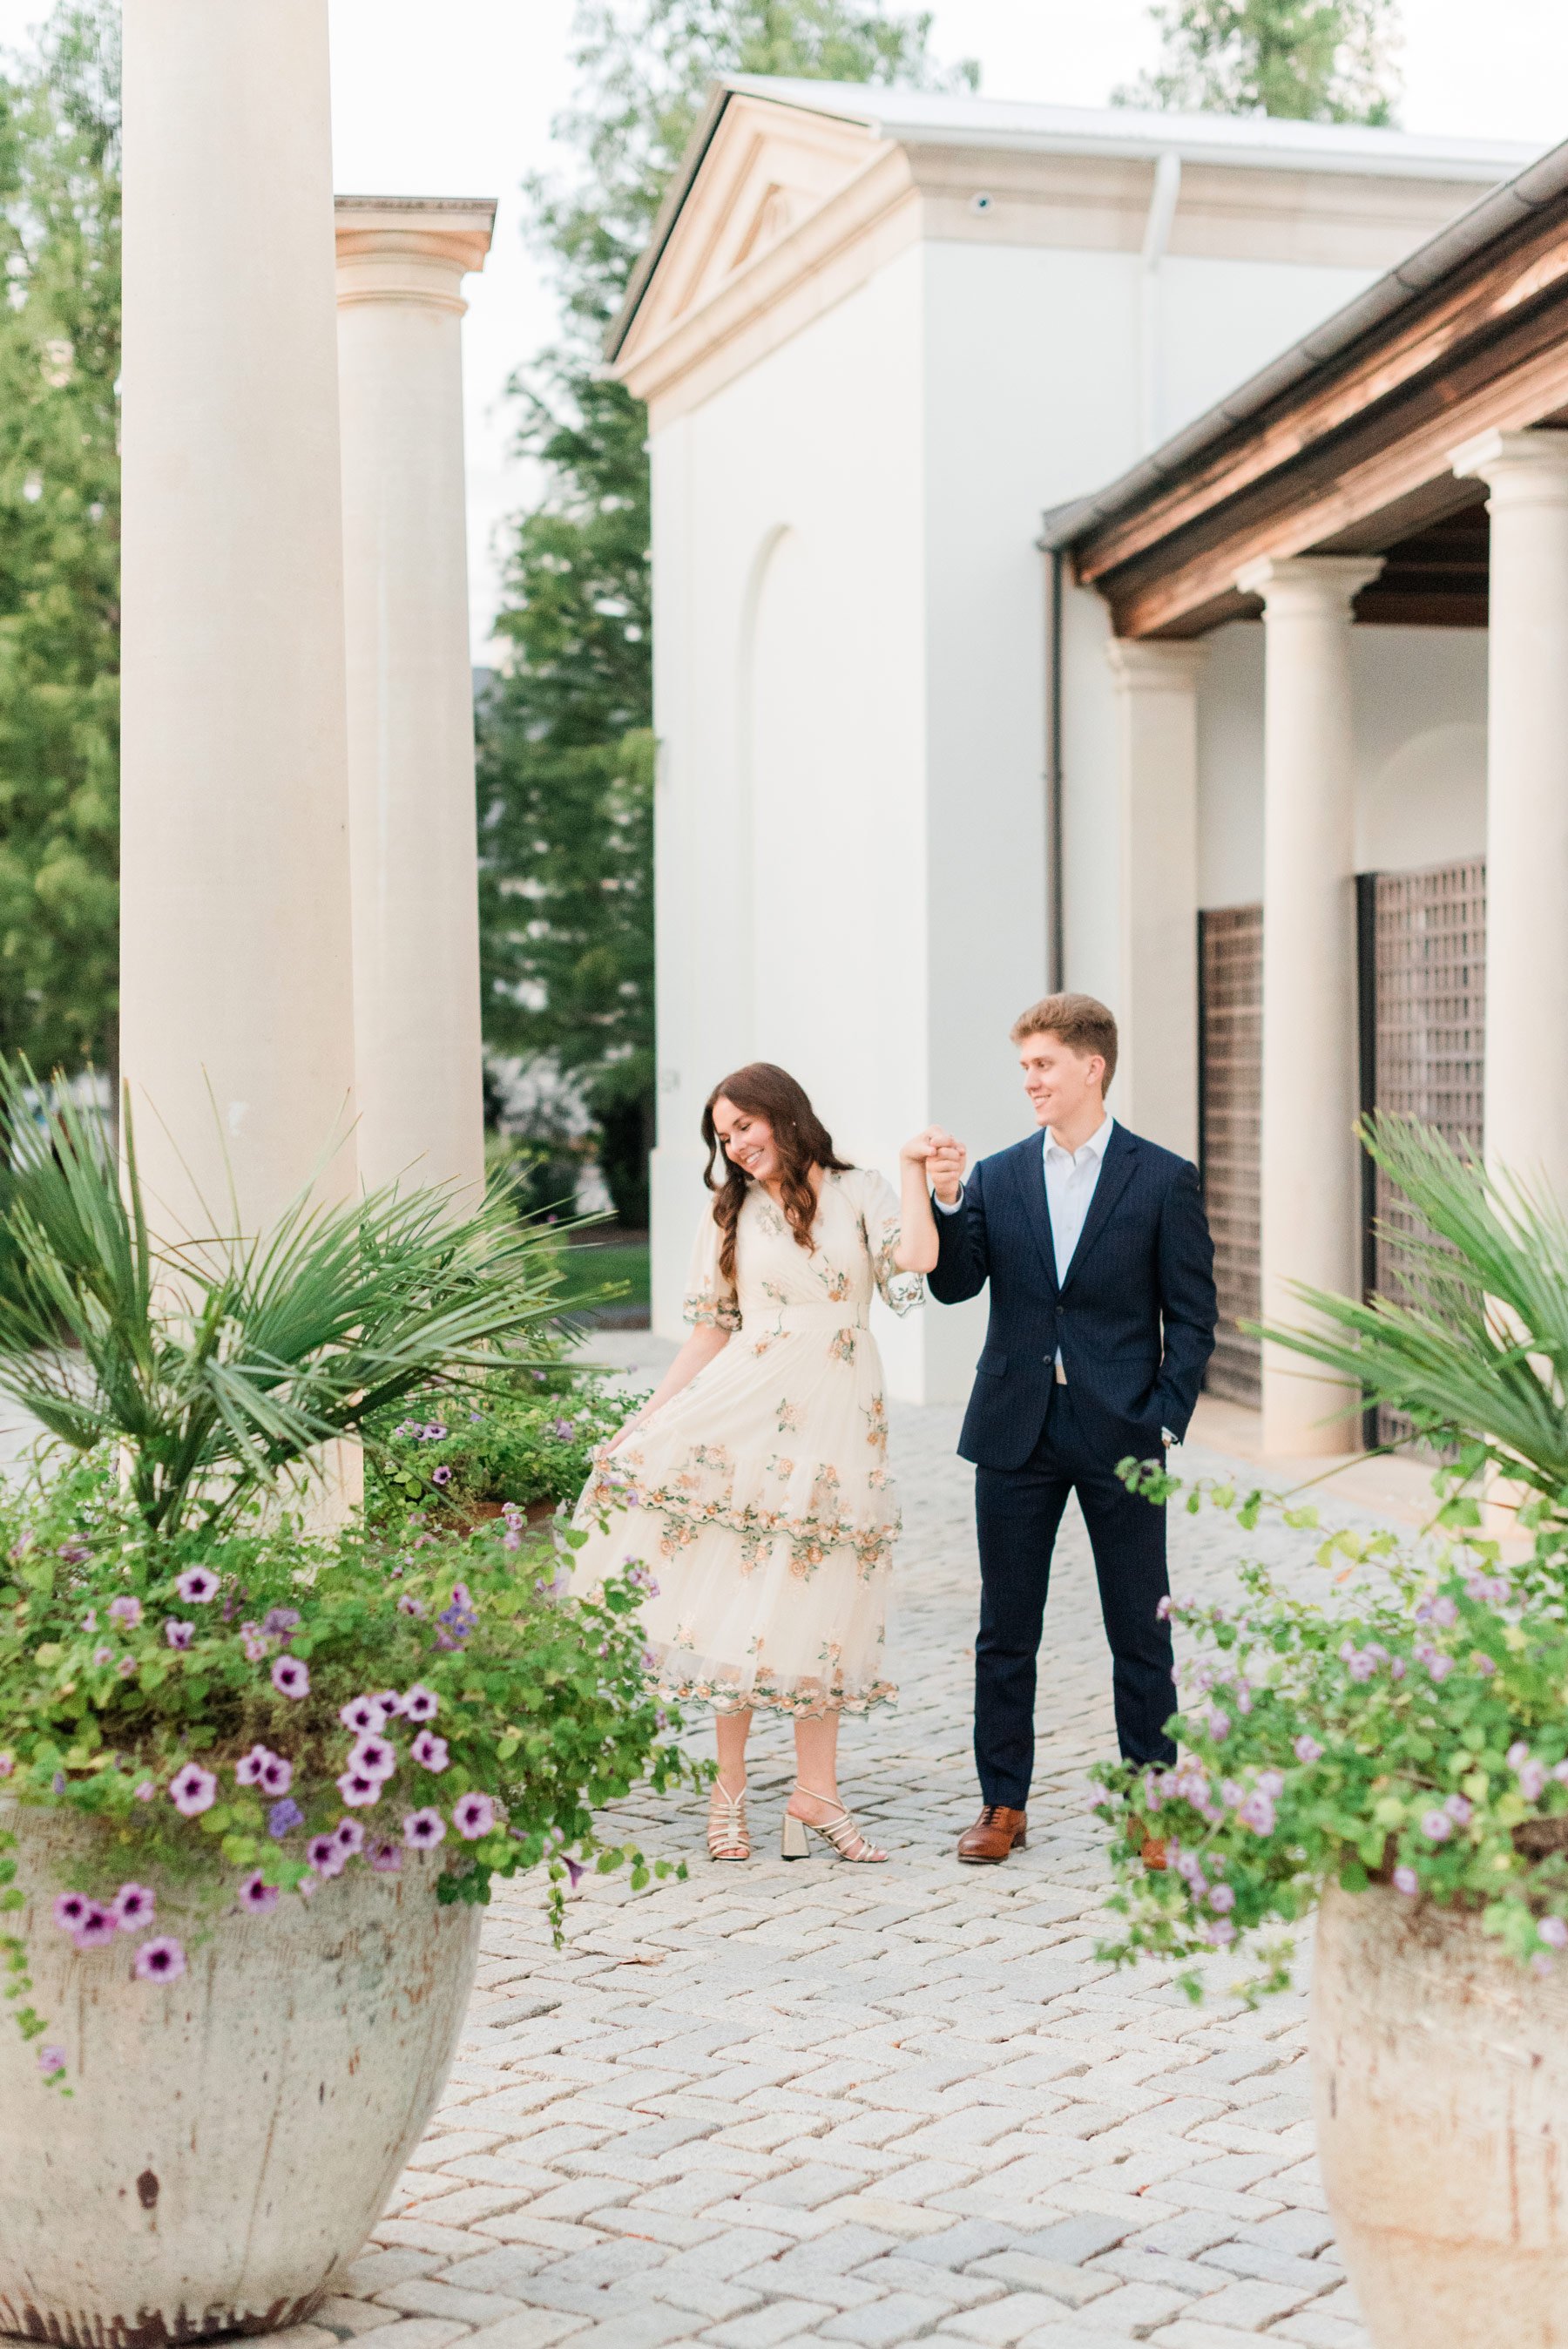    I love the way this Georgia boy was always holding her hand throughout the engagement session. #trilithstudios #georgiaweddingphotographer #fayettevillephotographer #fayettevilleengagementphotos #outdoorengagements #formalengagementphotos #reasons